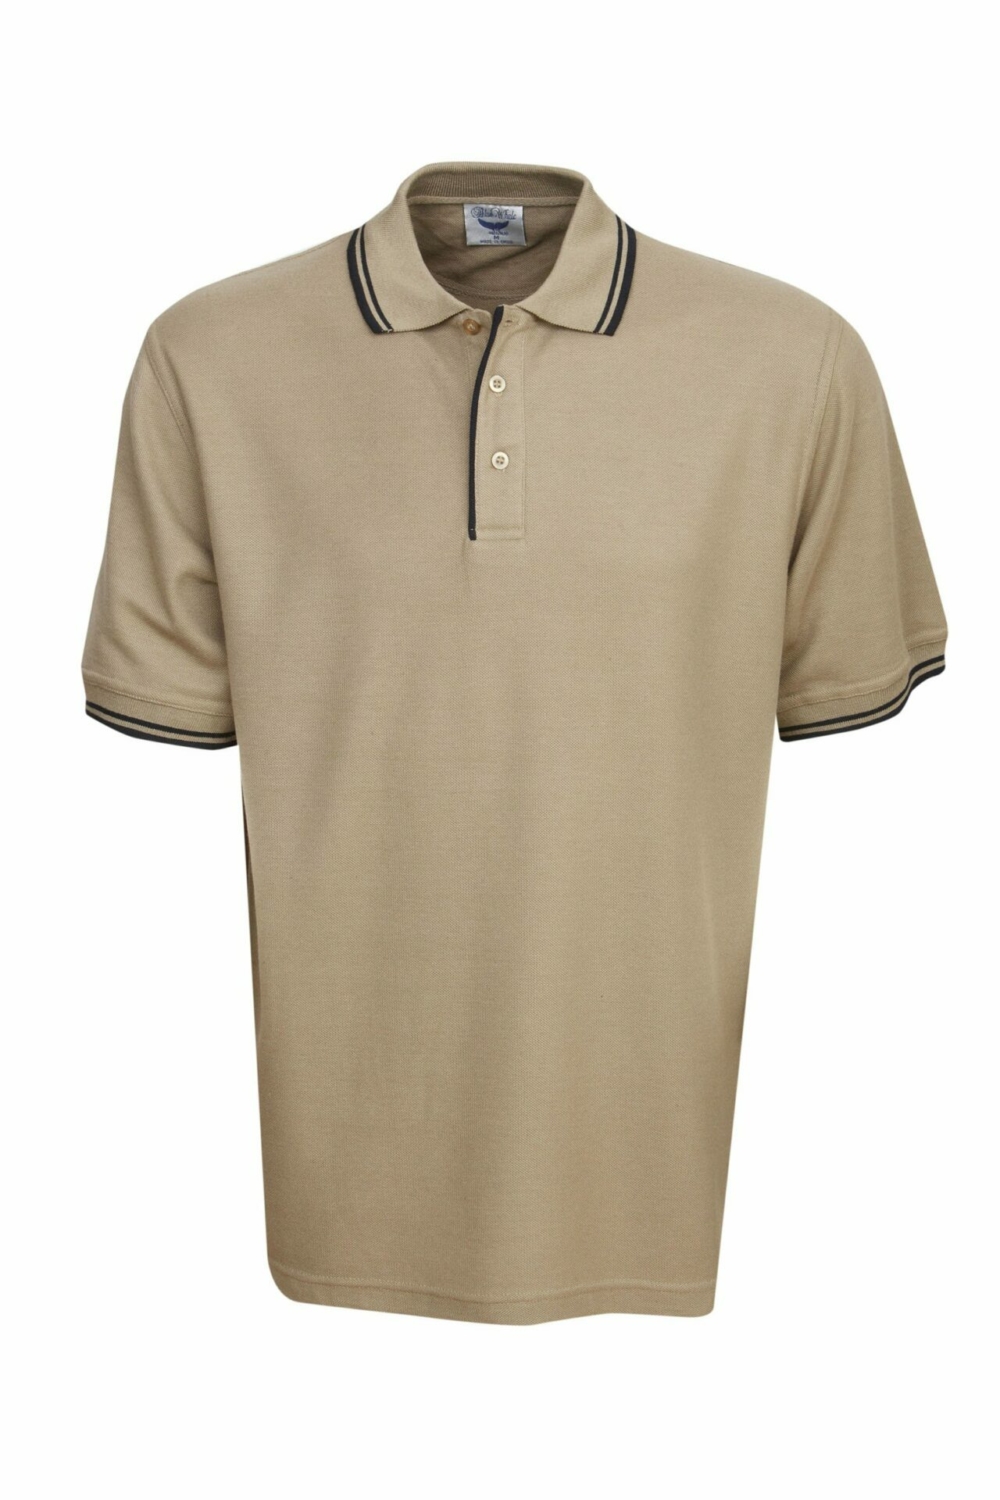 P51K-Pique Polo With Striped Collar And Cuff online Australia - Aj Safety